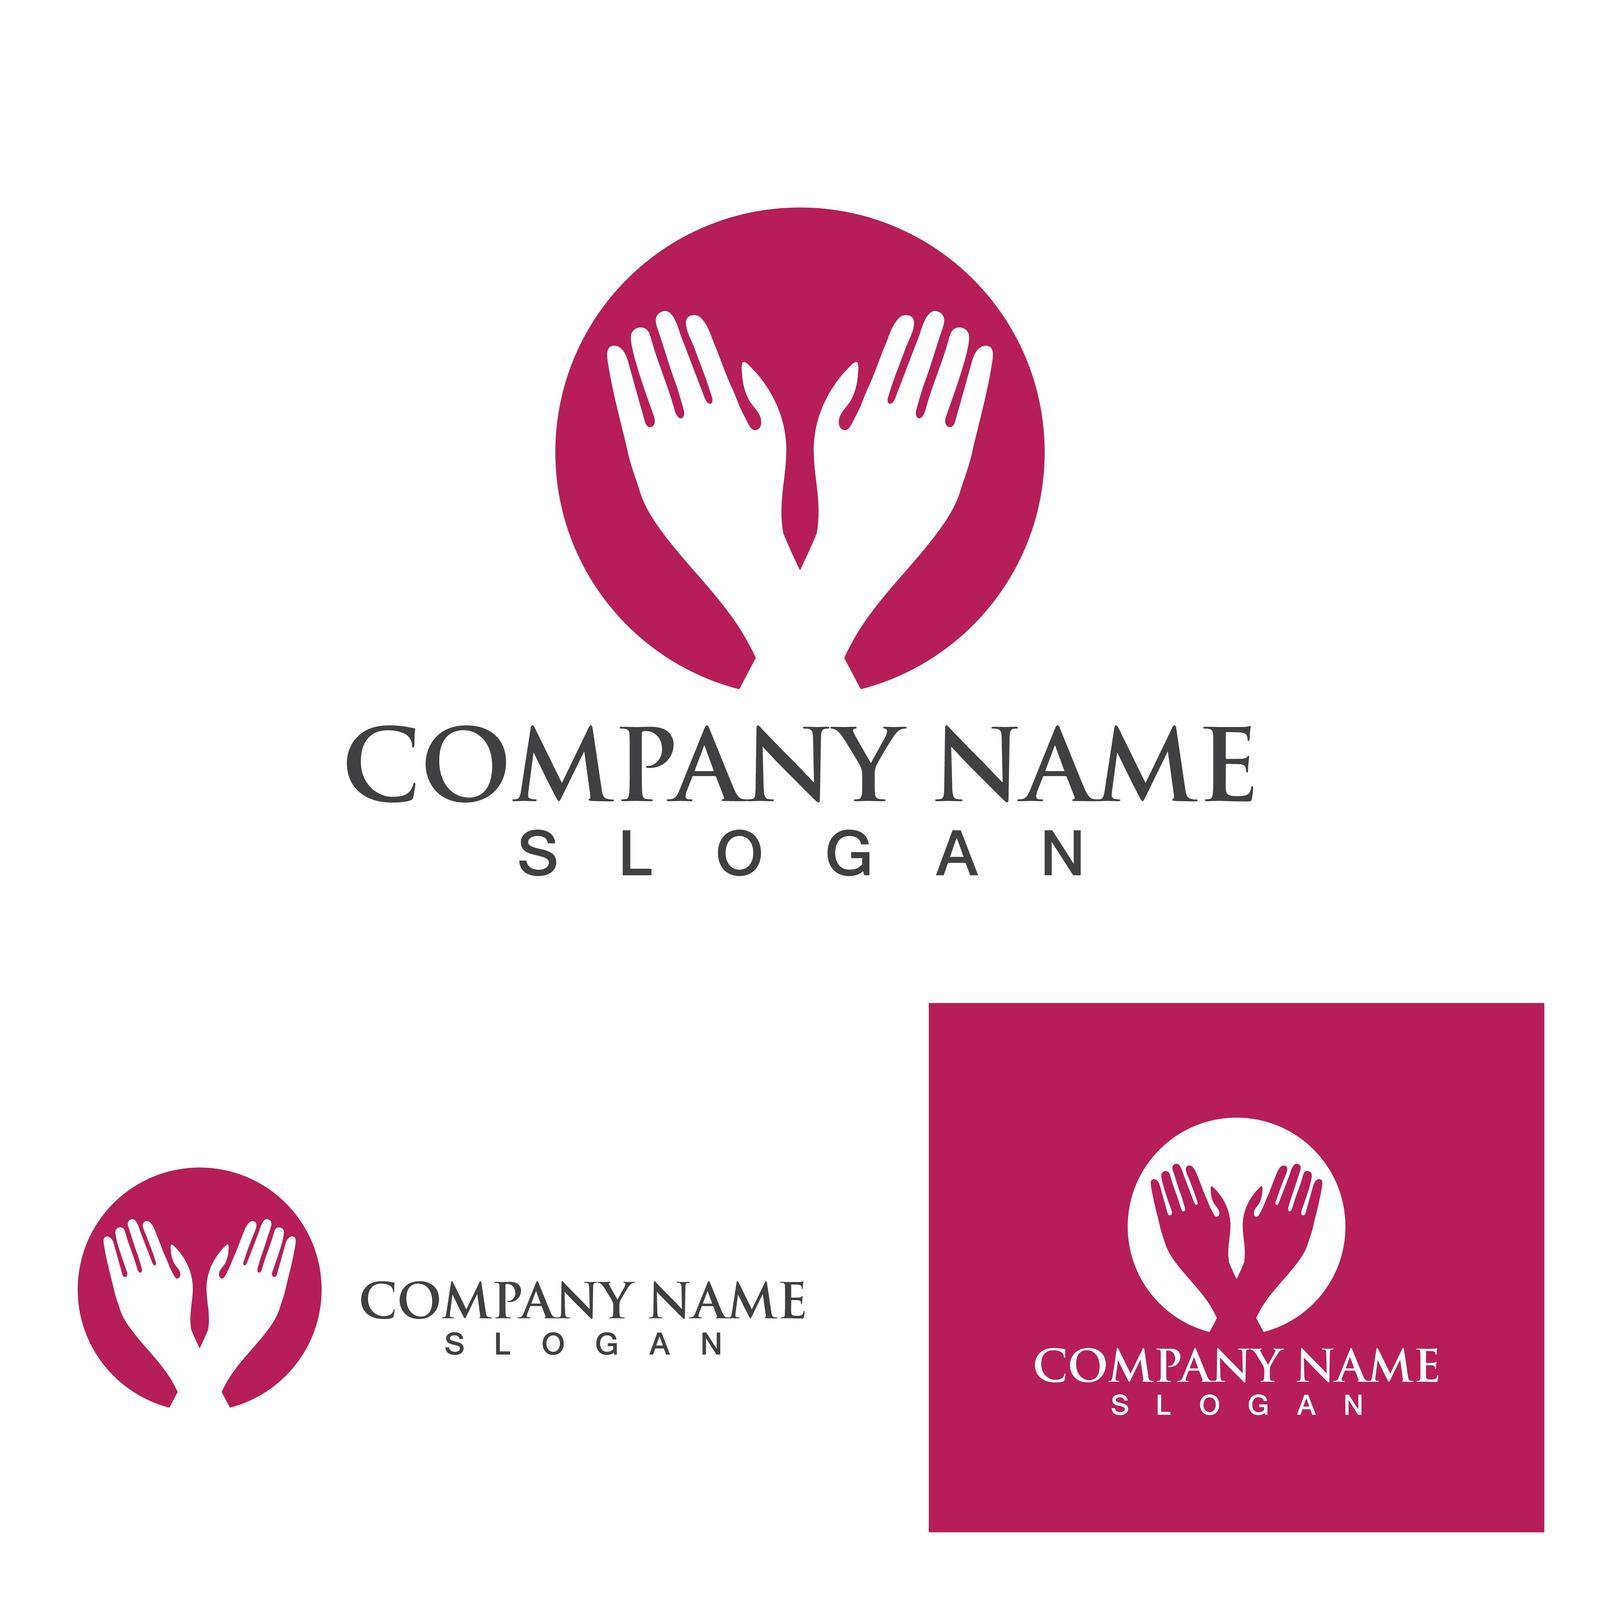 Hand care logo and symbol vector symbol by Mrsongrphc